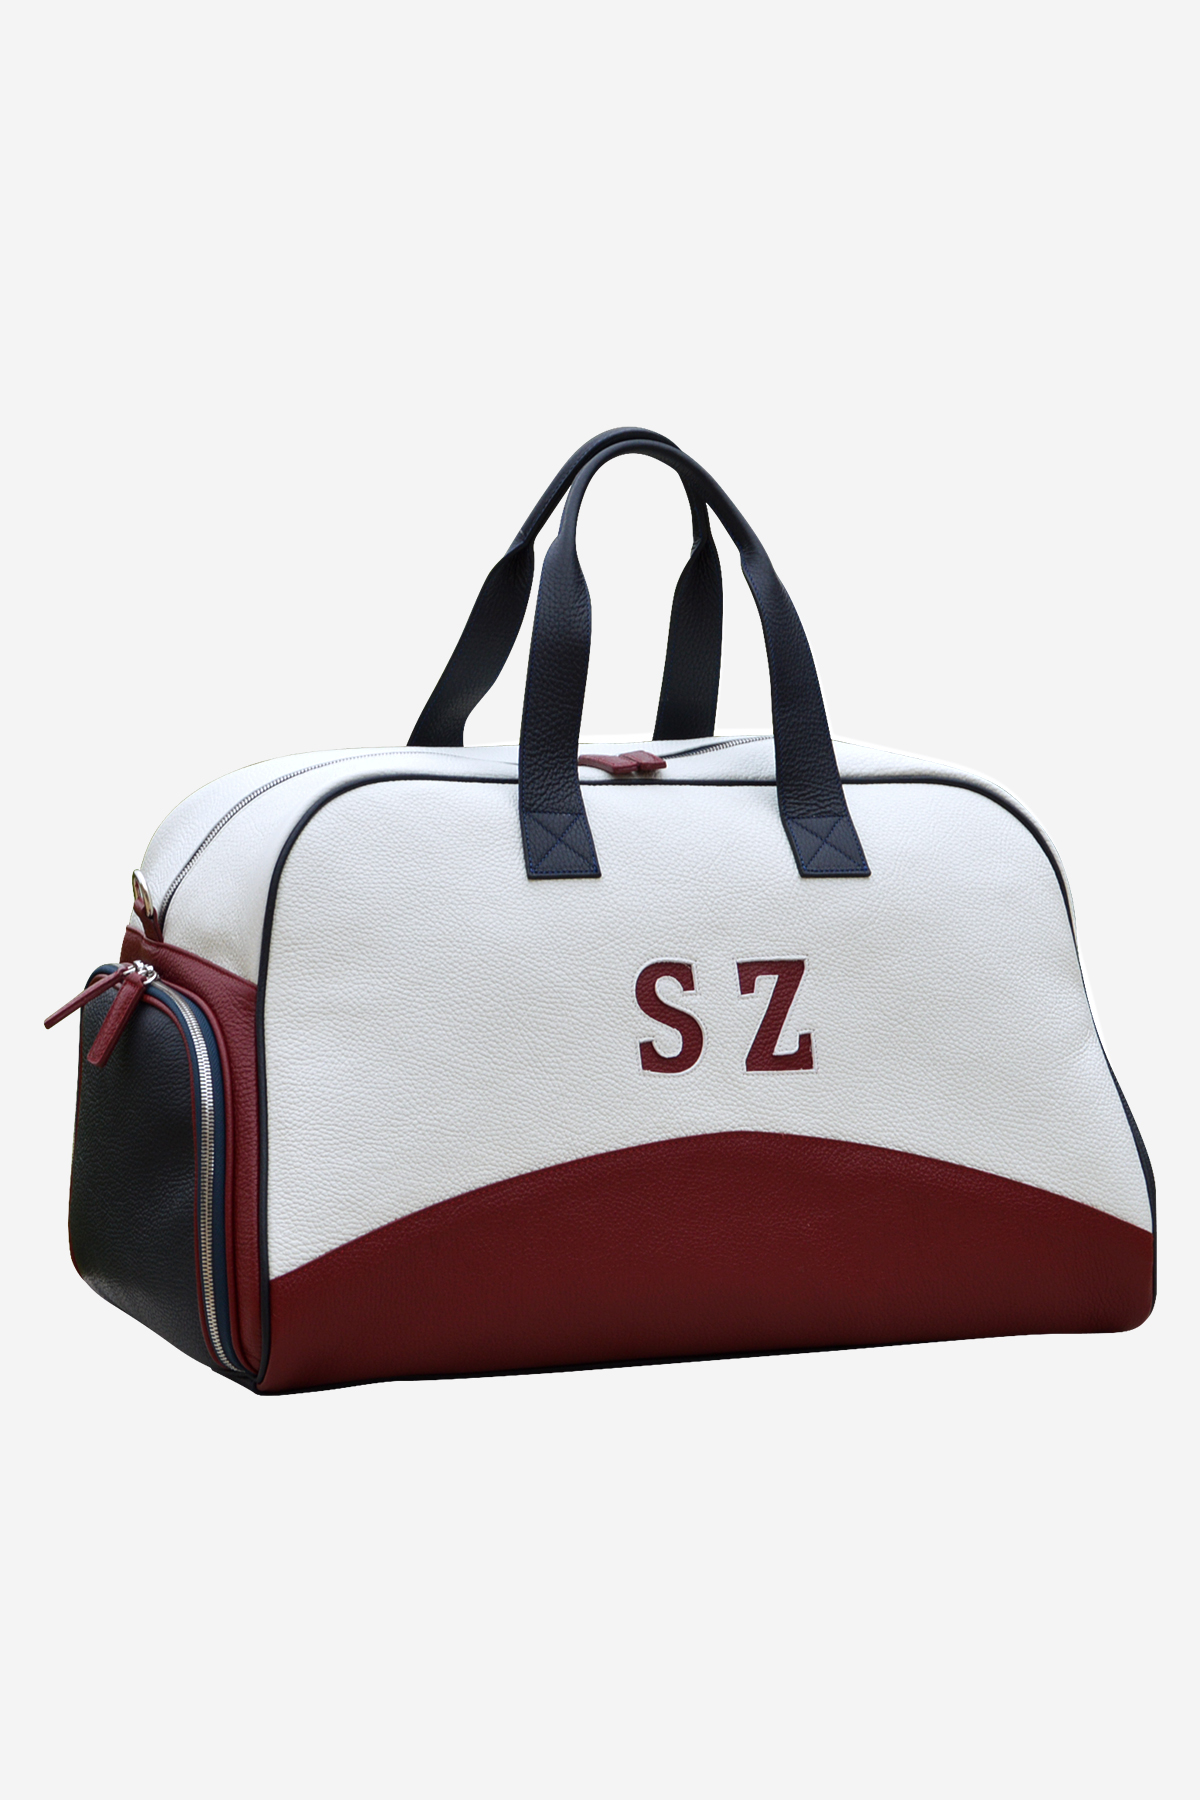 Original Sport Bag front leather waterproof white red blue